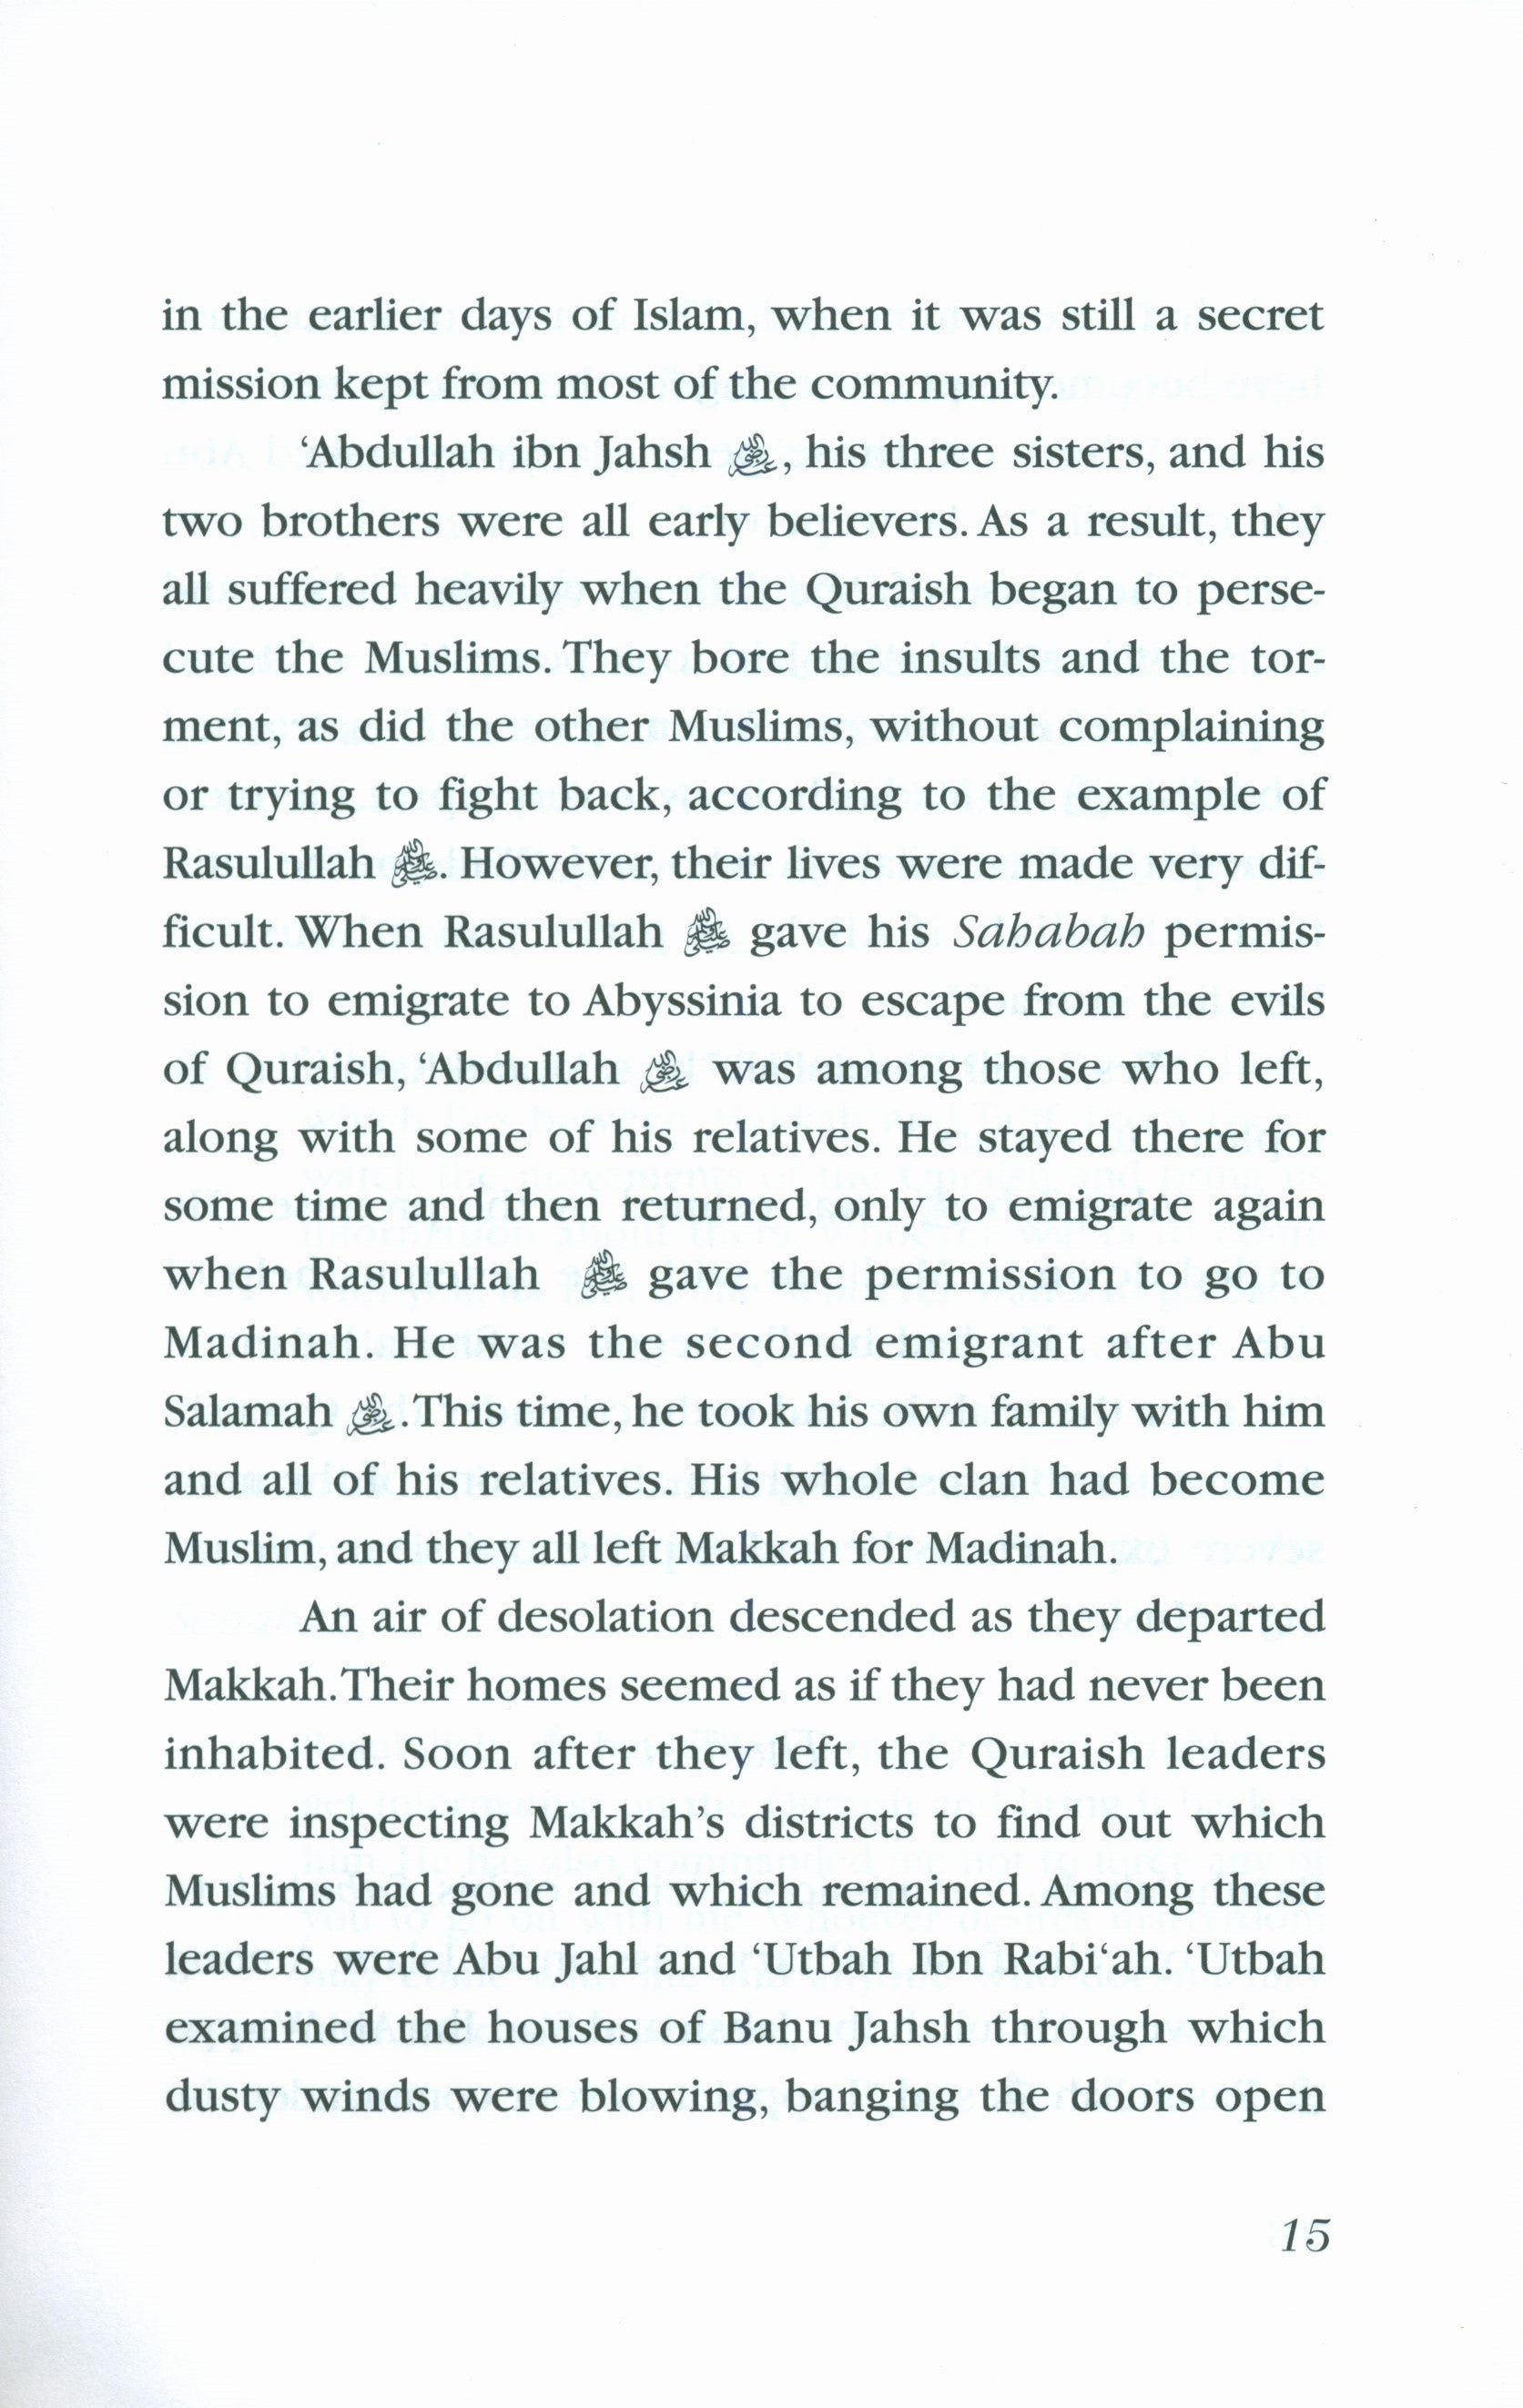 Stories of the Sahabah Volume 2 - The First Ones